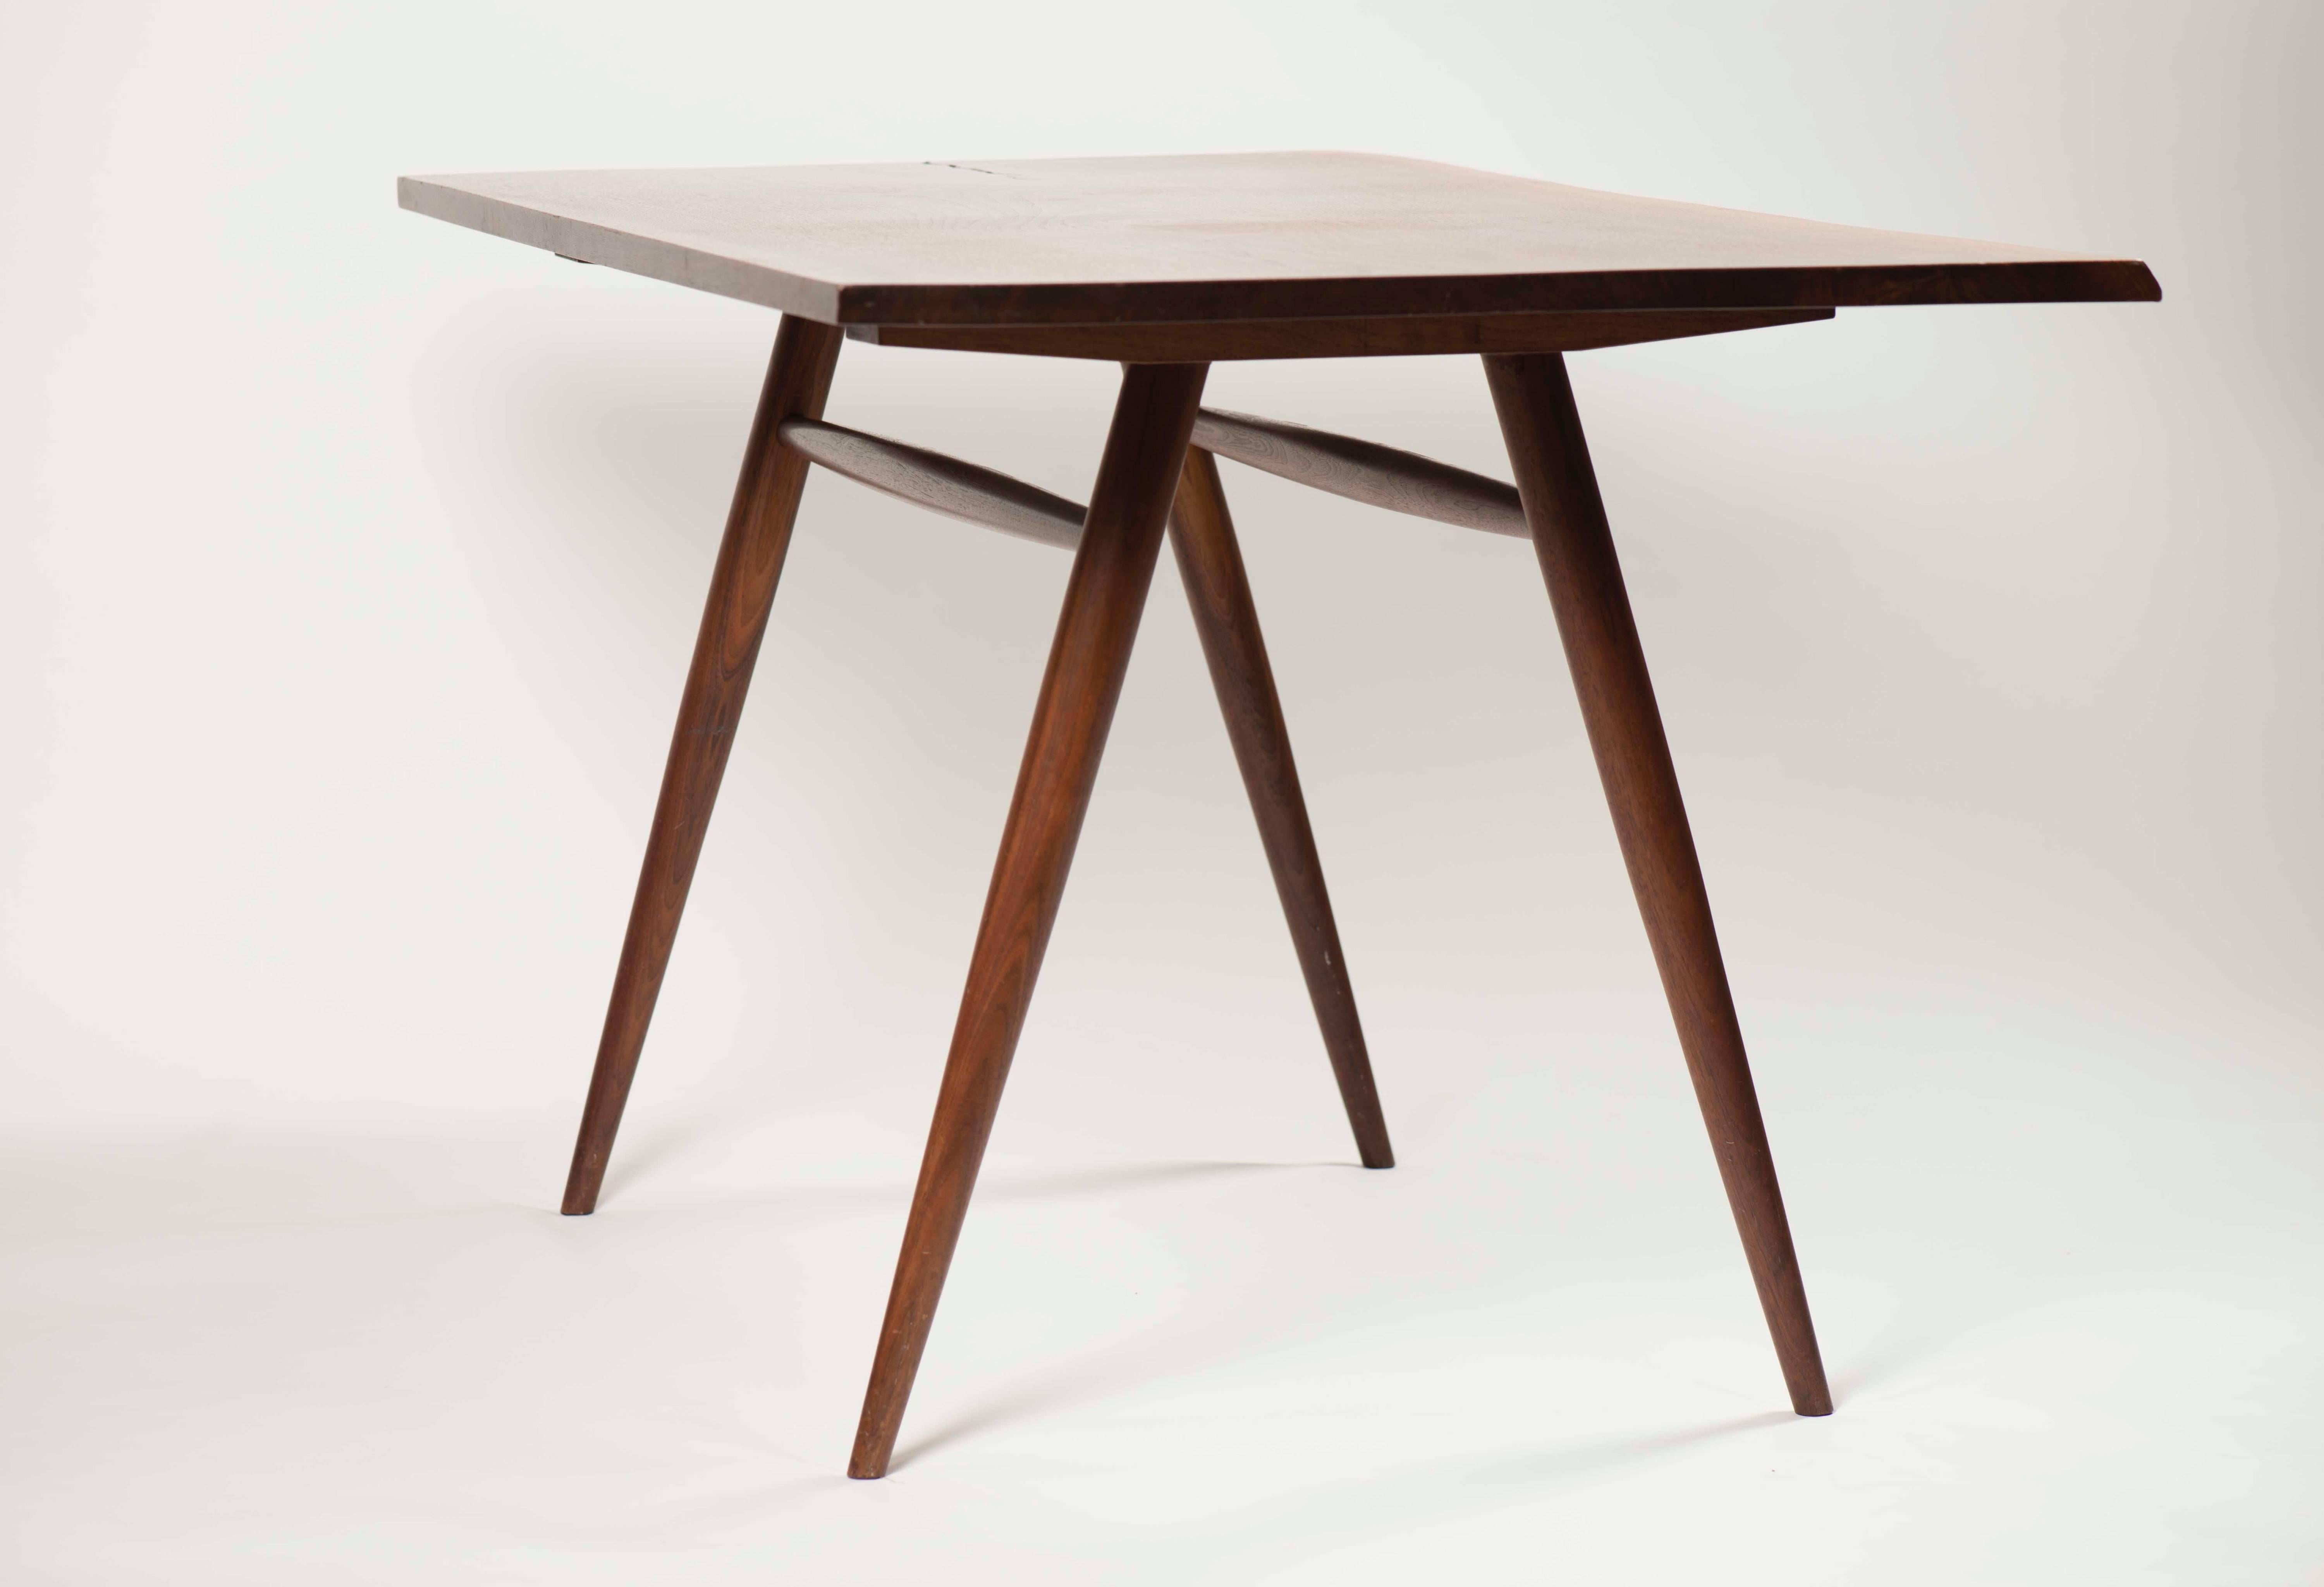 A beautiful, sculptural example by renowned woodworker George Nakashima. Tapered legs, live edge and butterfly key inlays showcase the signature attributes of Nakashima's work. The size makes the table ideal for smaller dining areas or suitable as a